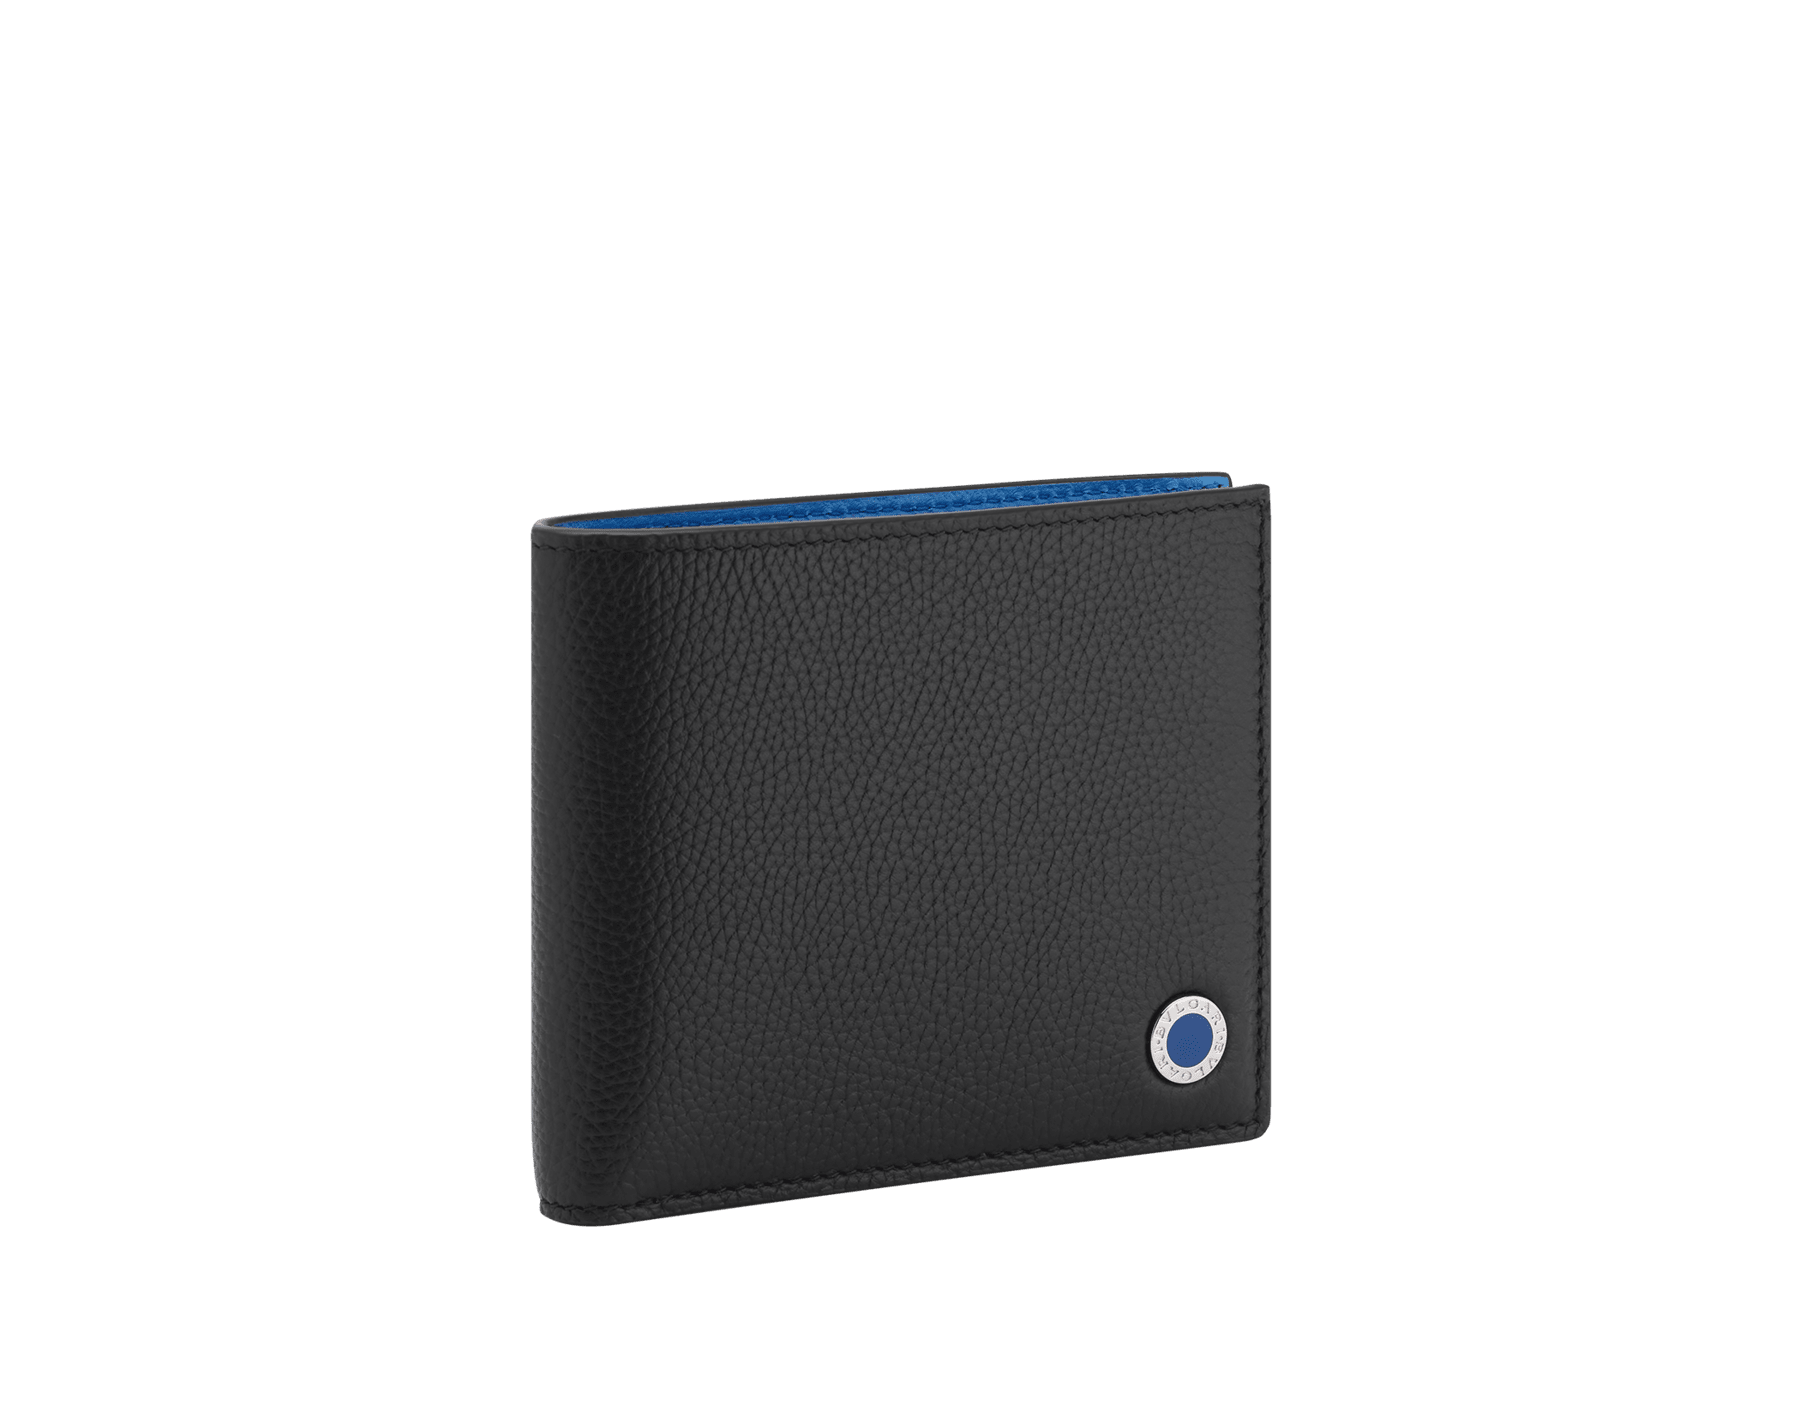 BULGARI BULGARI Man hipster compact wallet in soft, full grain black calf leather with Mediterranean lapis blue nappa leather interior. Iconic palladium-plated brass embellishment with midnight sapphire blue enamel, and folded closure. 293119 image 1